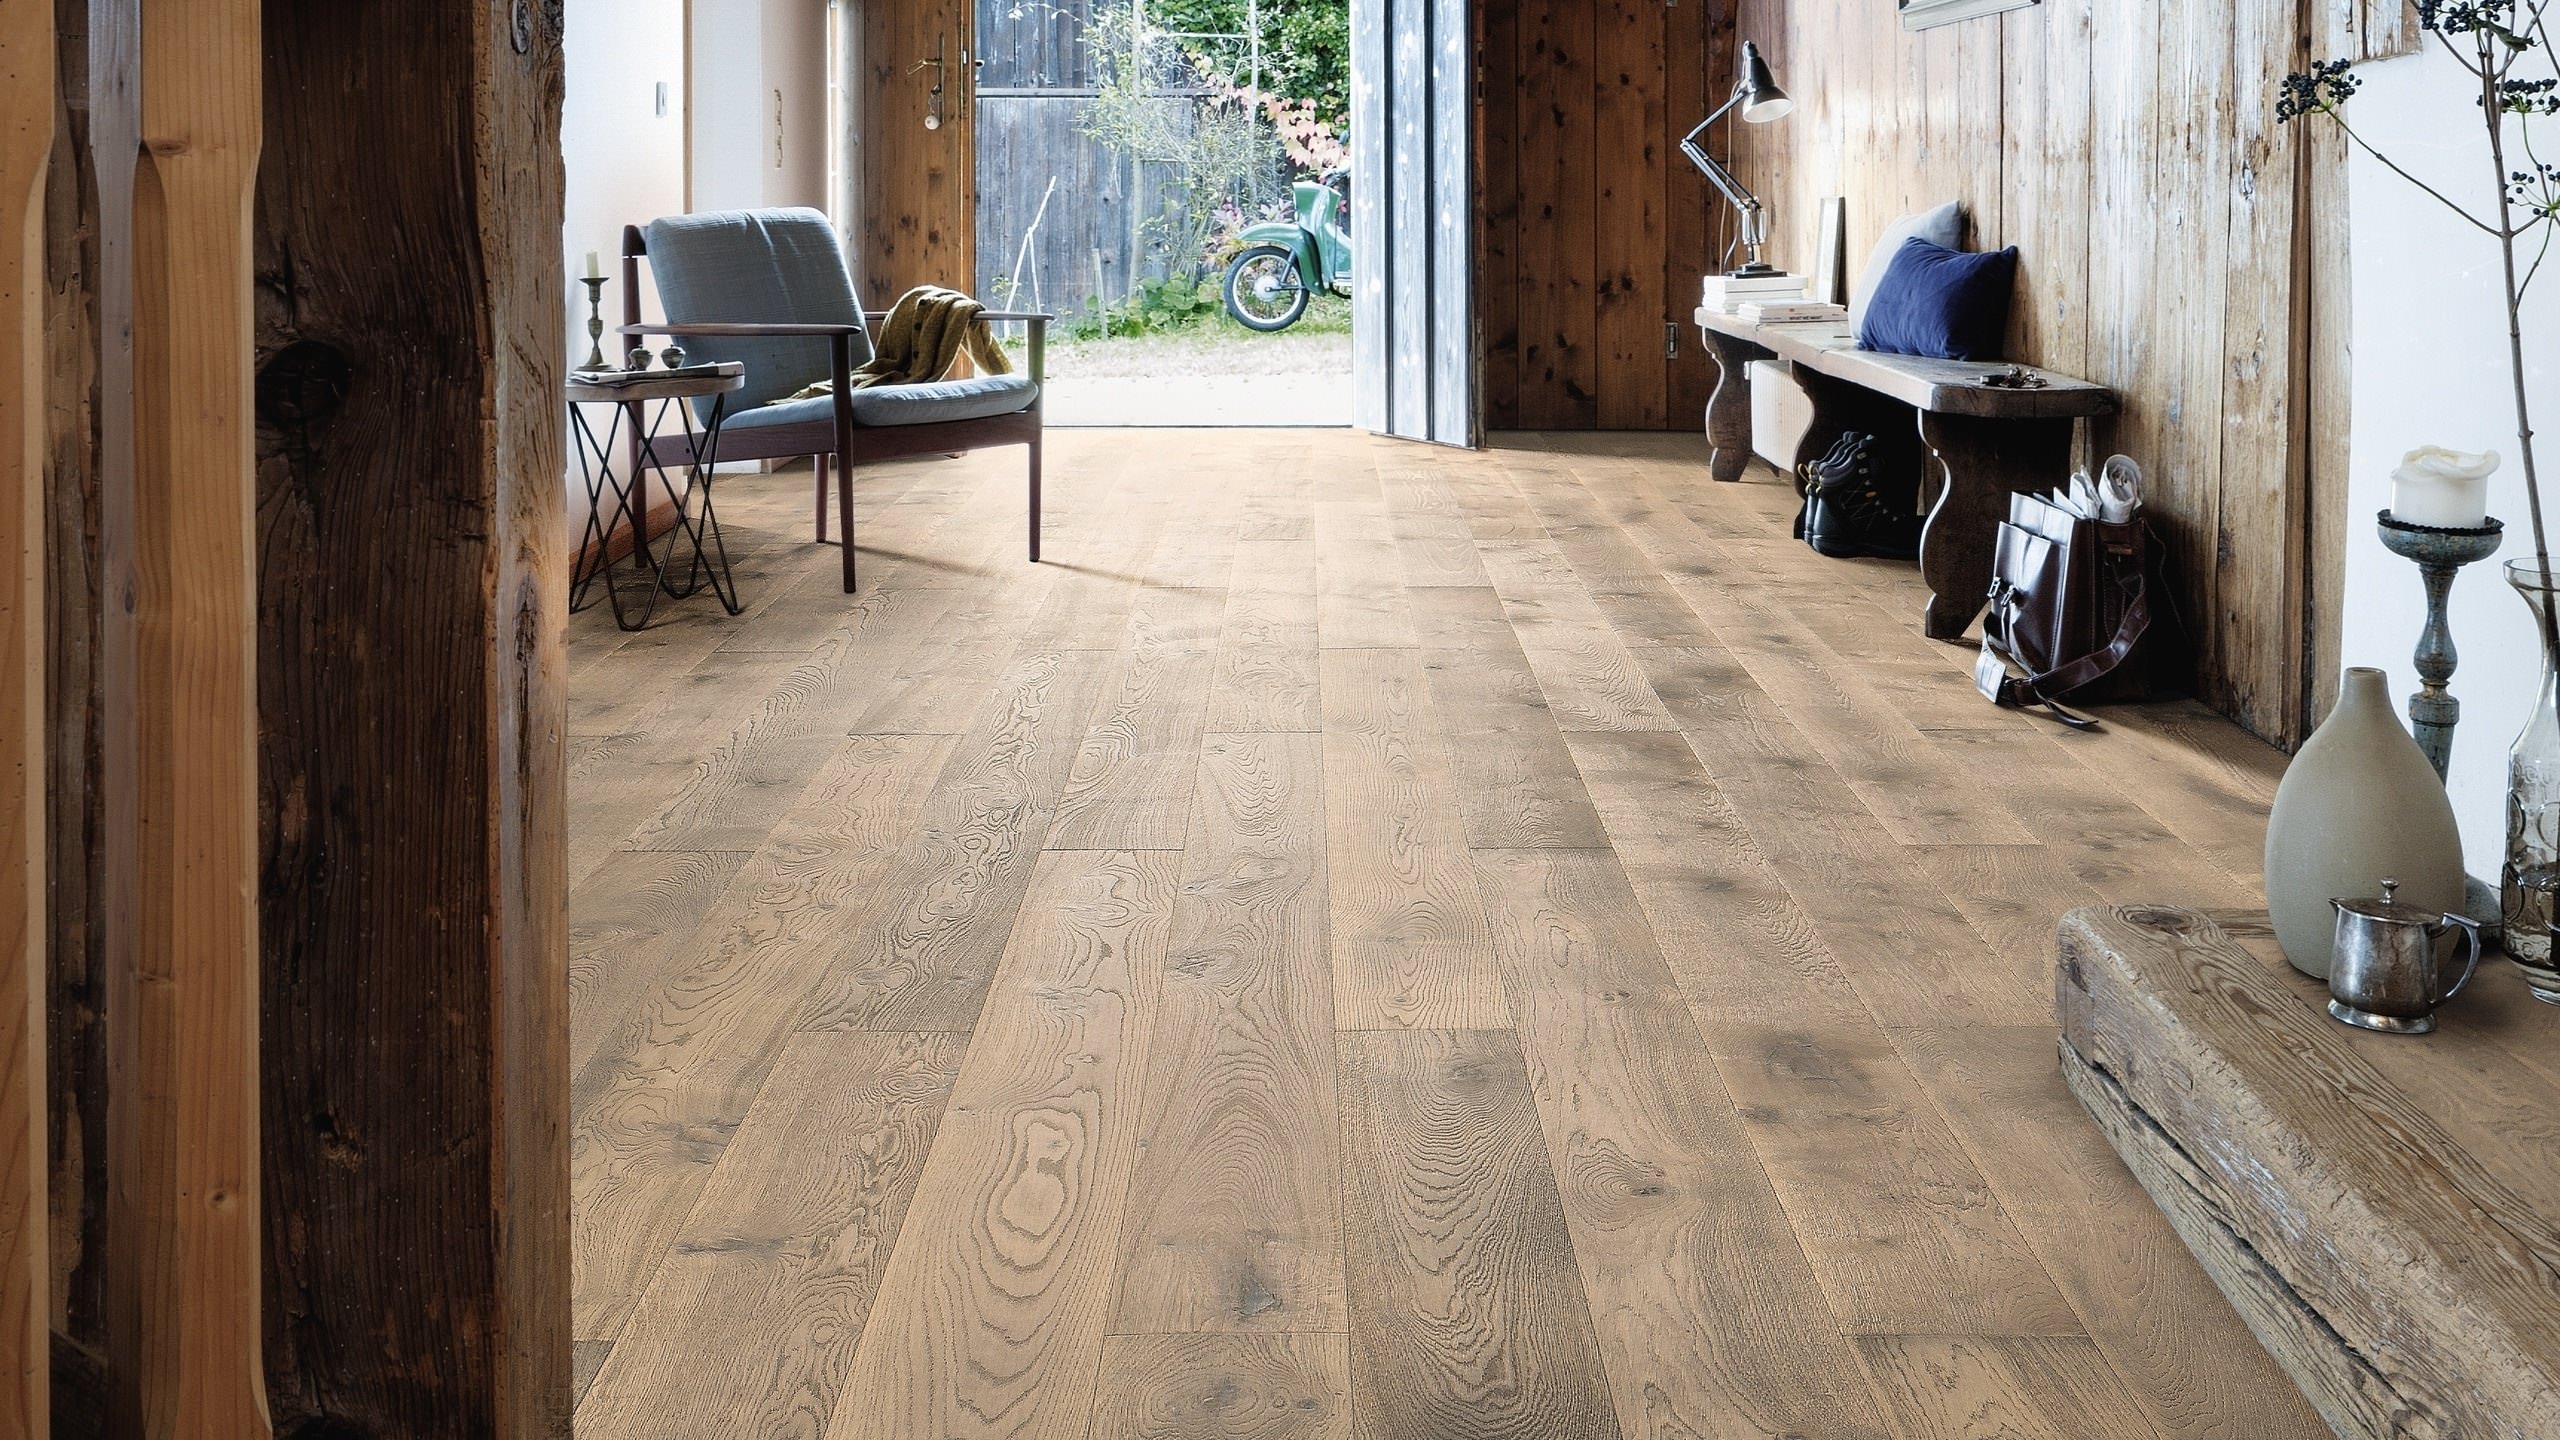 HARO PARQUET 4000 Plank 1-Strip 180 4V Oak Tobacco Grey Sauvage retro brushed naturaLin plus Top Connect